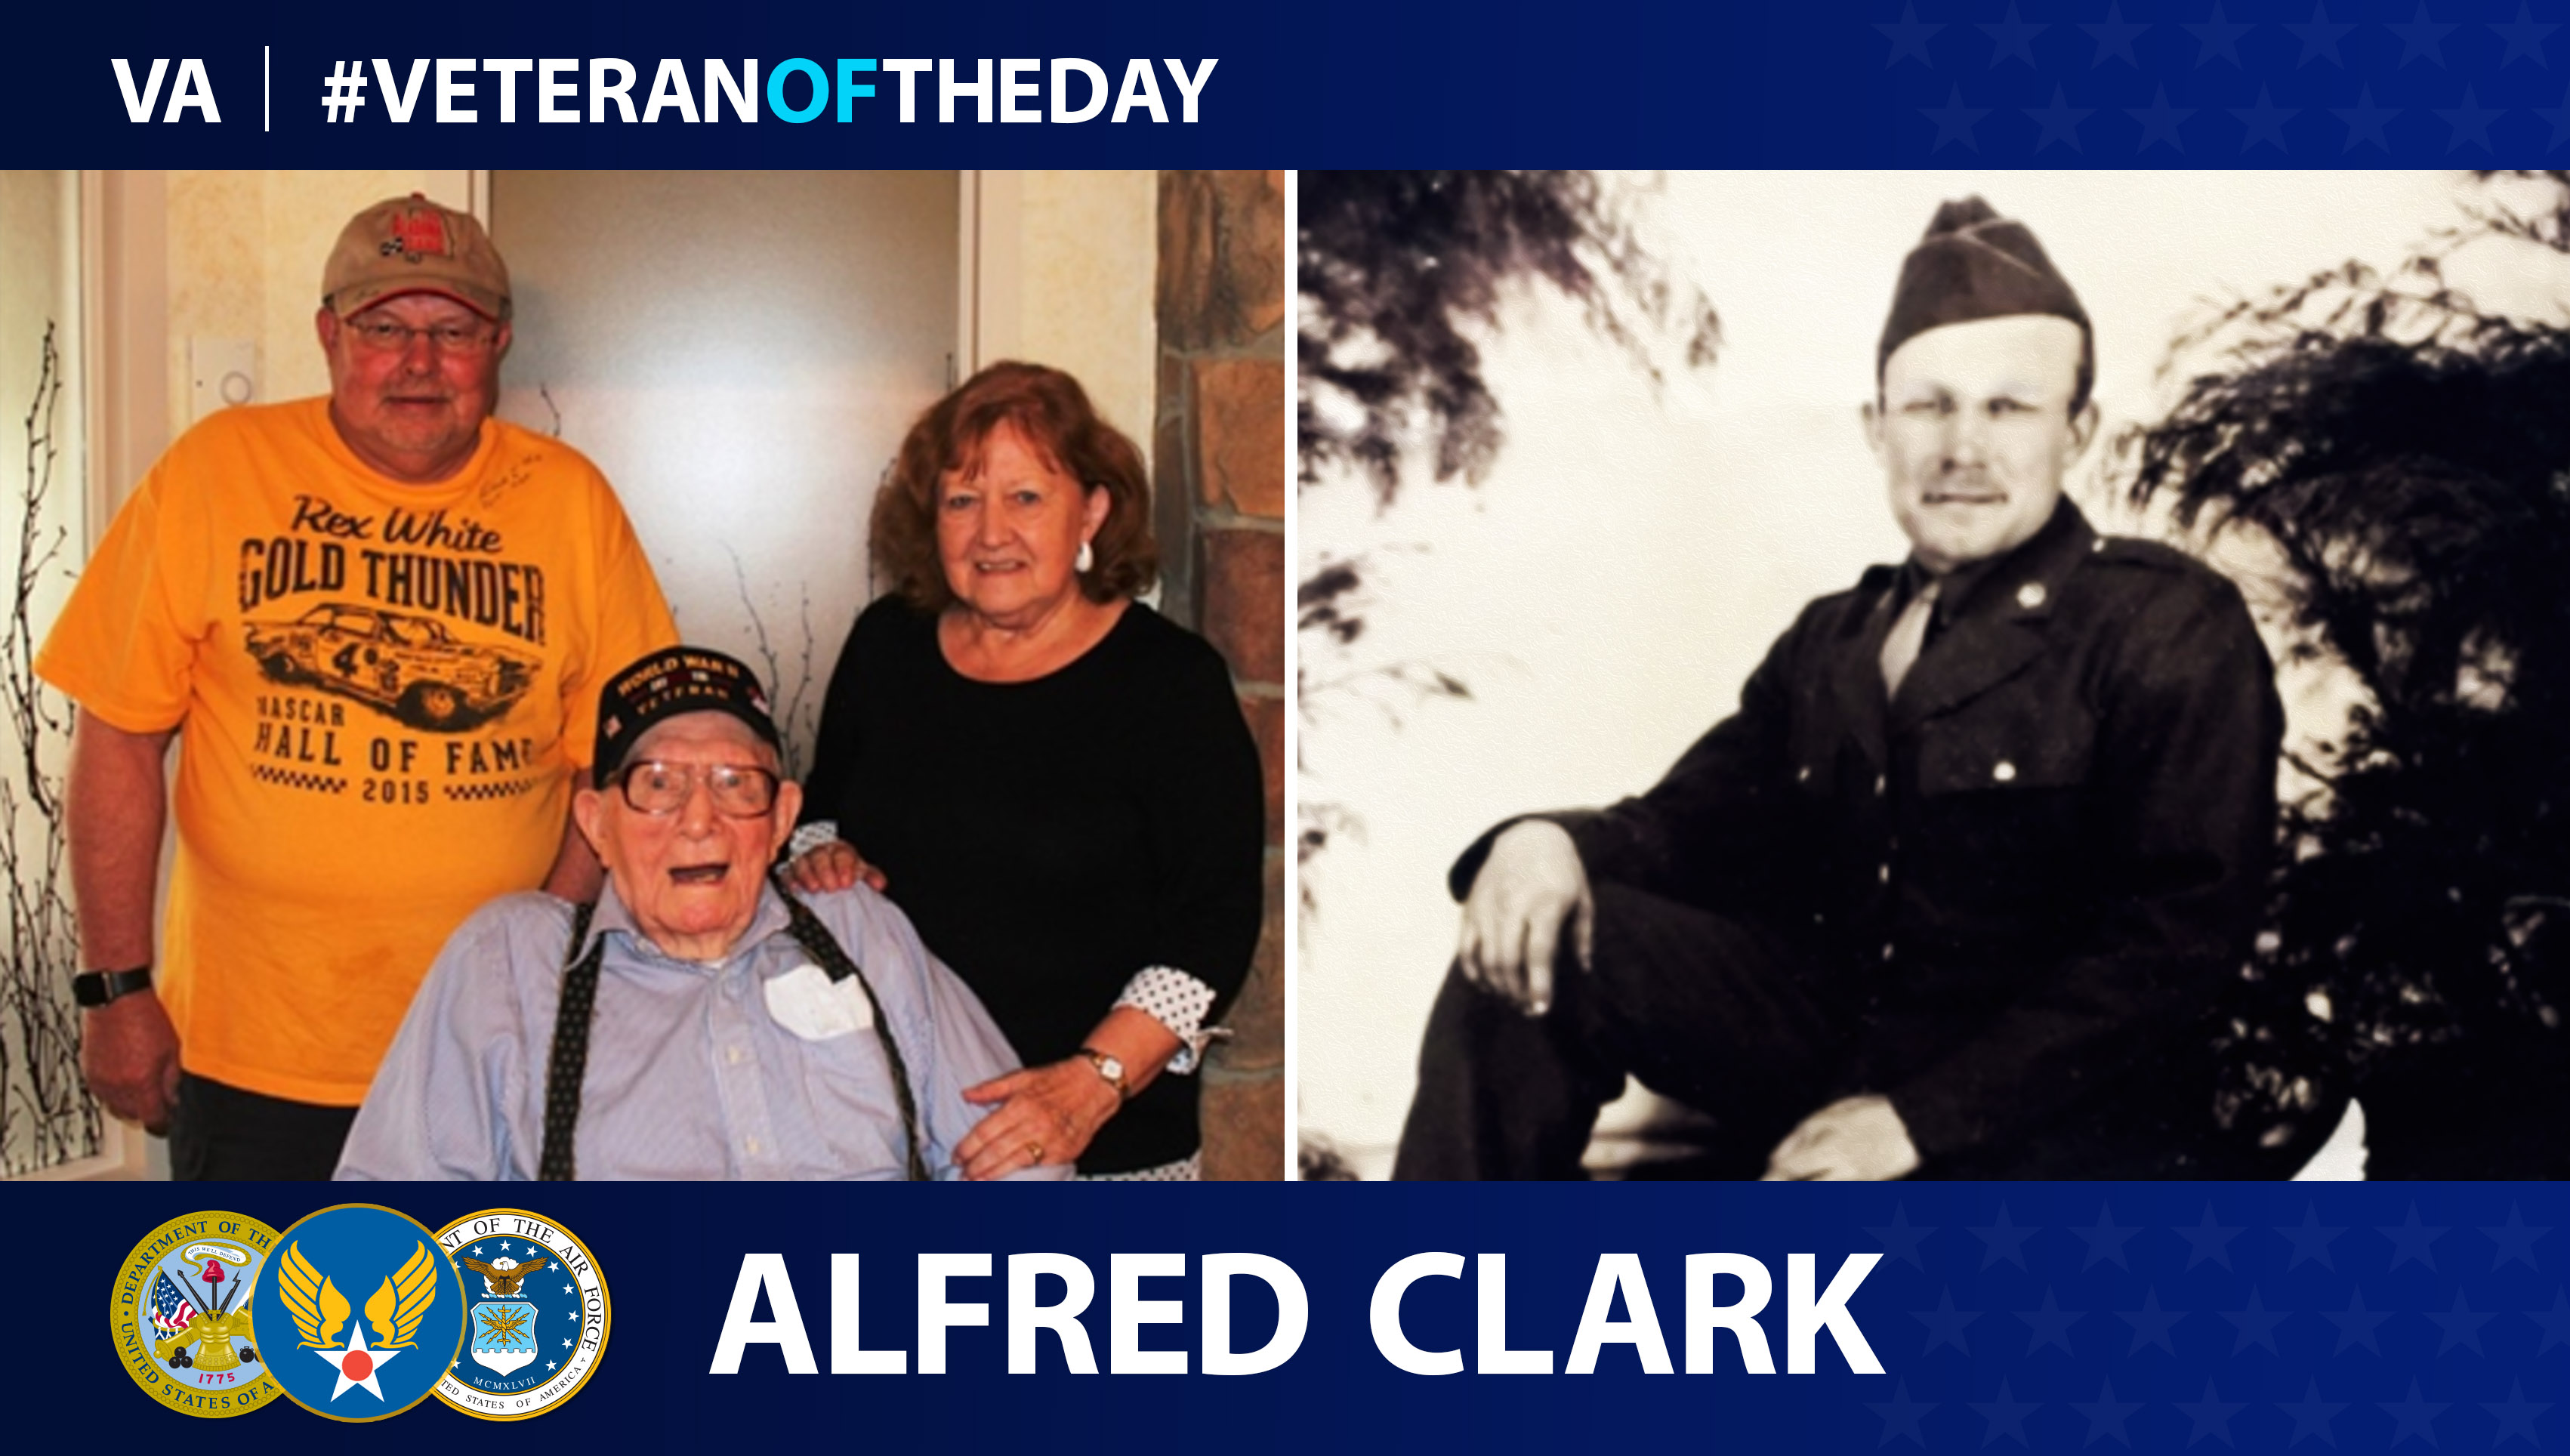 Alfred Clark is today's Veteran of the Day.